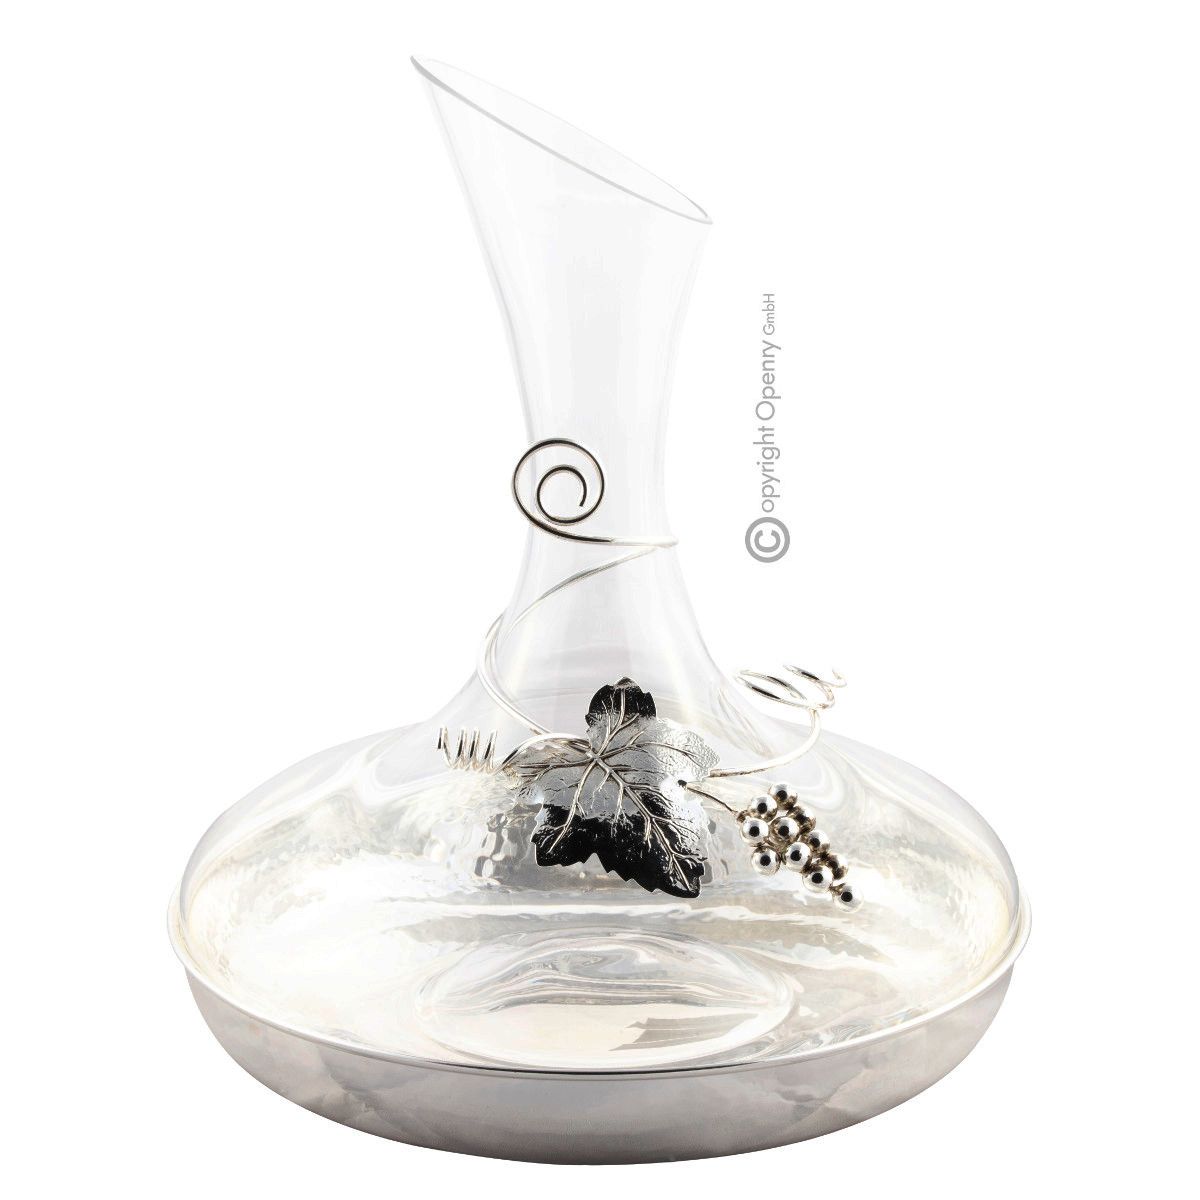 Boteghe -Real Made in Italy– Unique fine carafe decanter silver plated